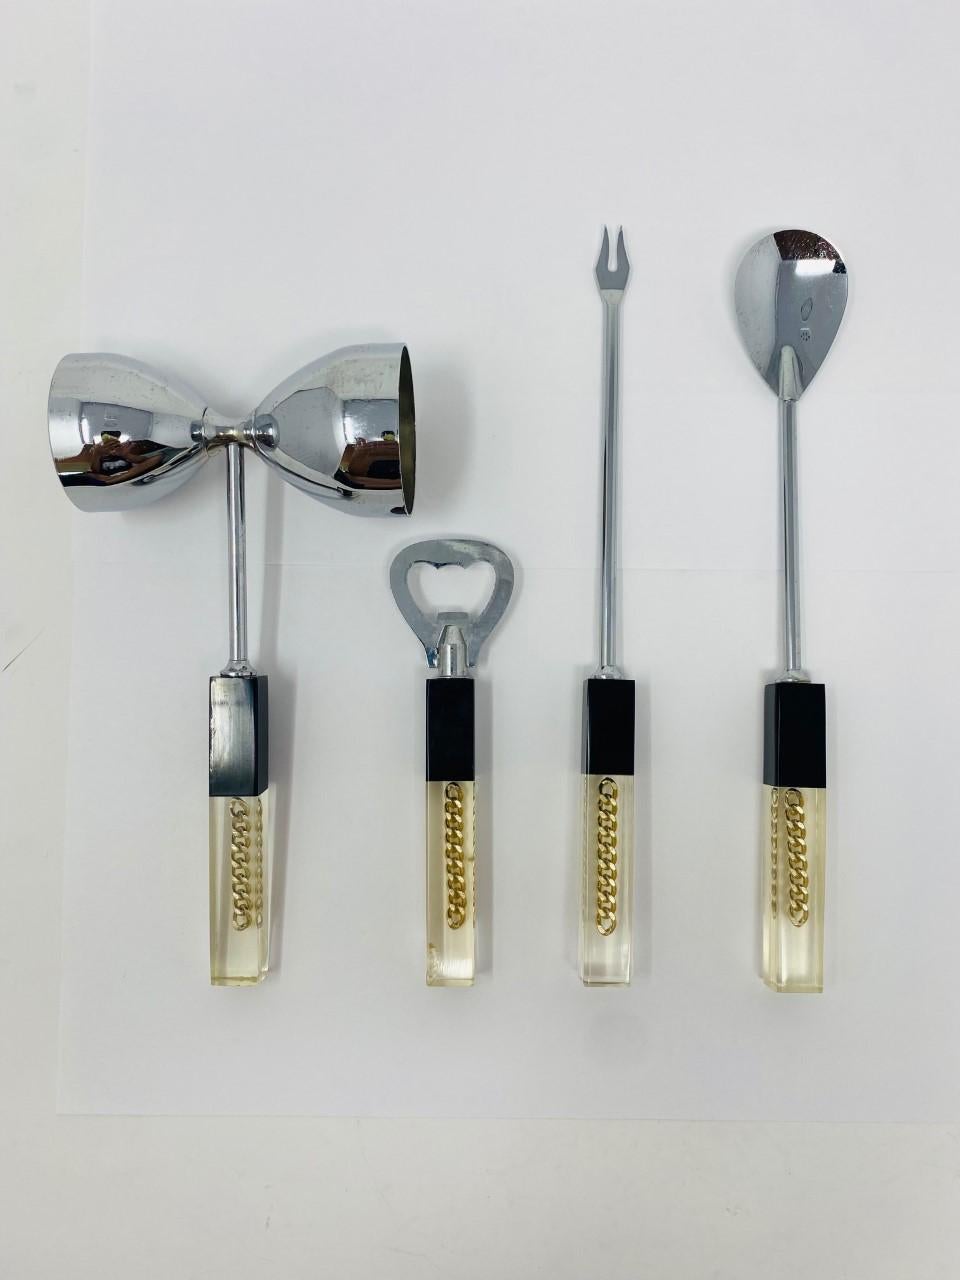 One of a kind midcentury lucite and chrome handle with stainless steel top bar tools set. This is a perfect statement piece to enhance your bar décor. It is a great piece to display on your bar or kitchen counter, on your drink cart, use at dinner